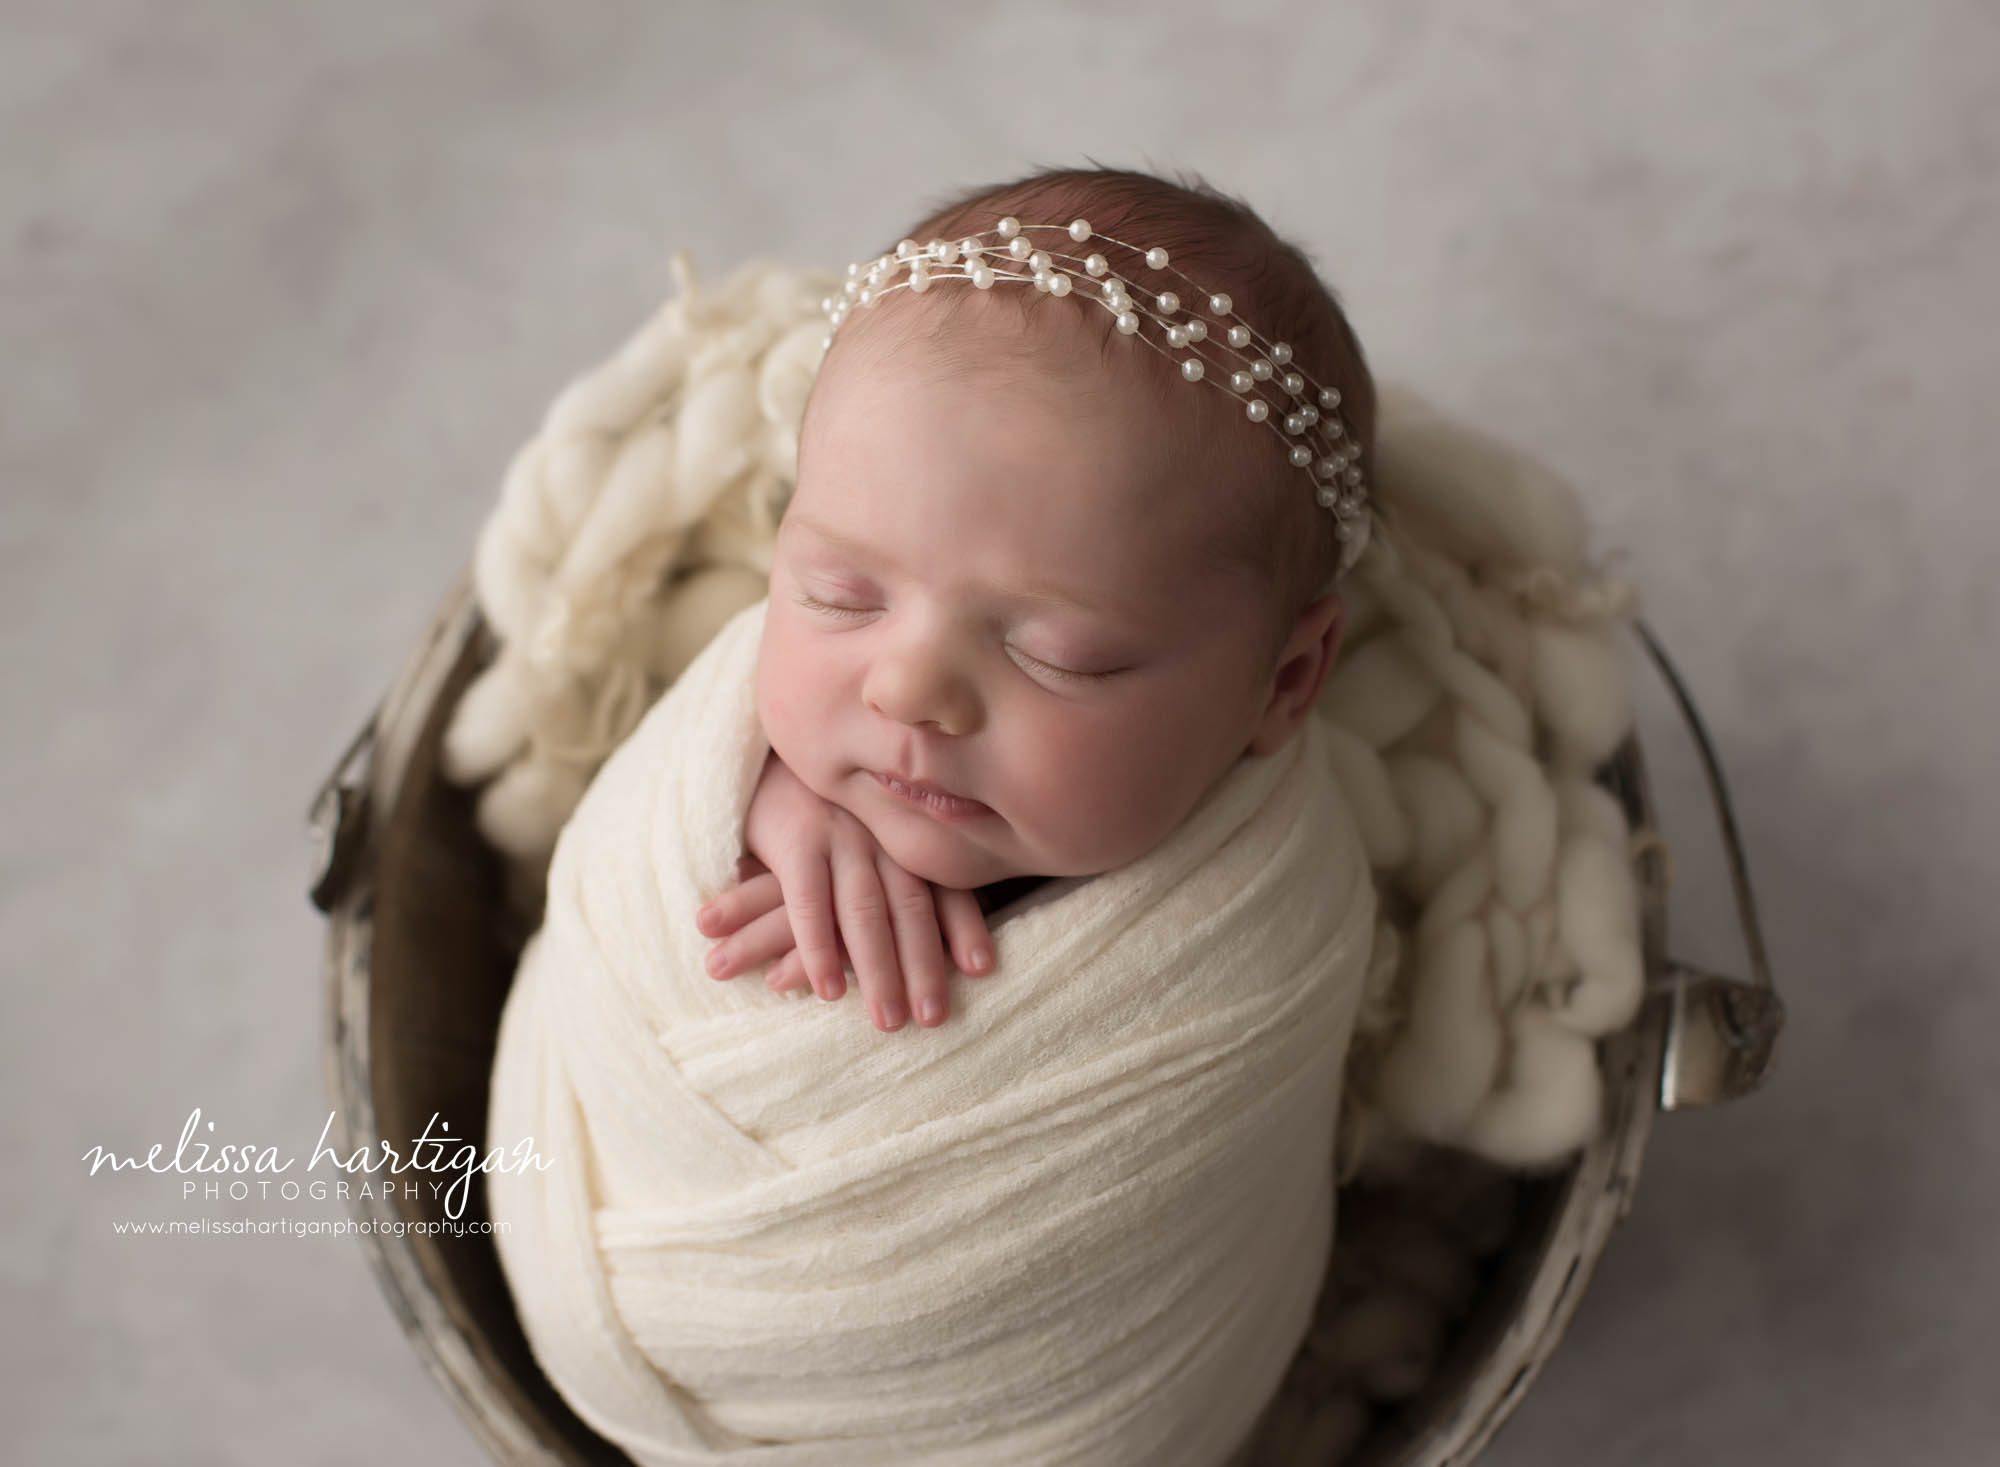 Newborn baby girl posed in metal bucket wrapped in cream wrap with beaded headband